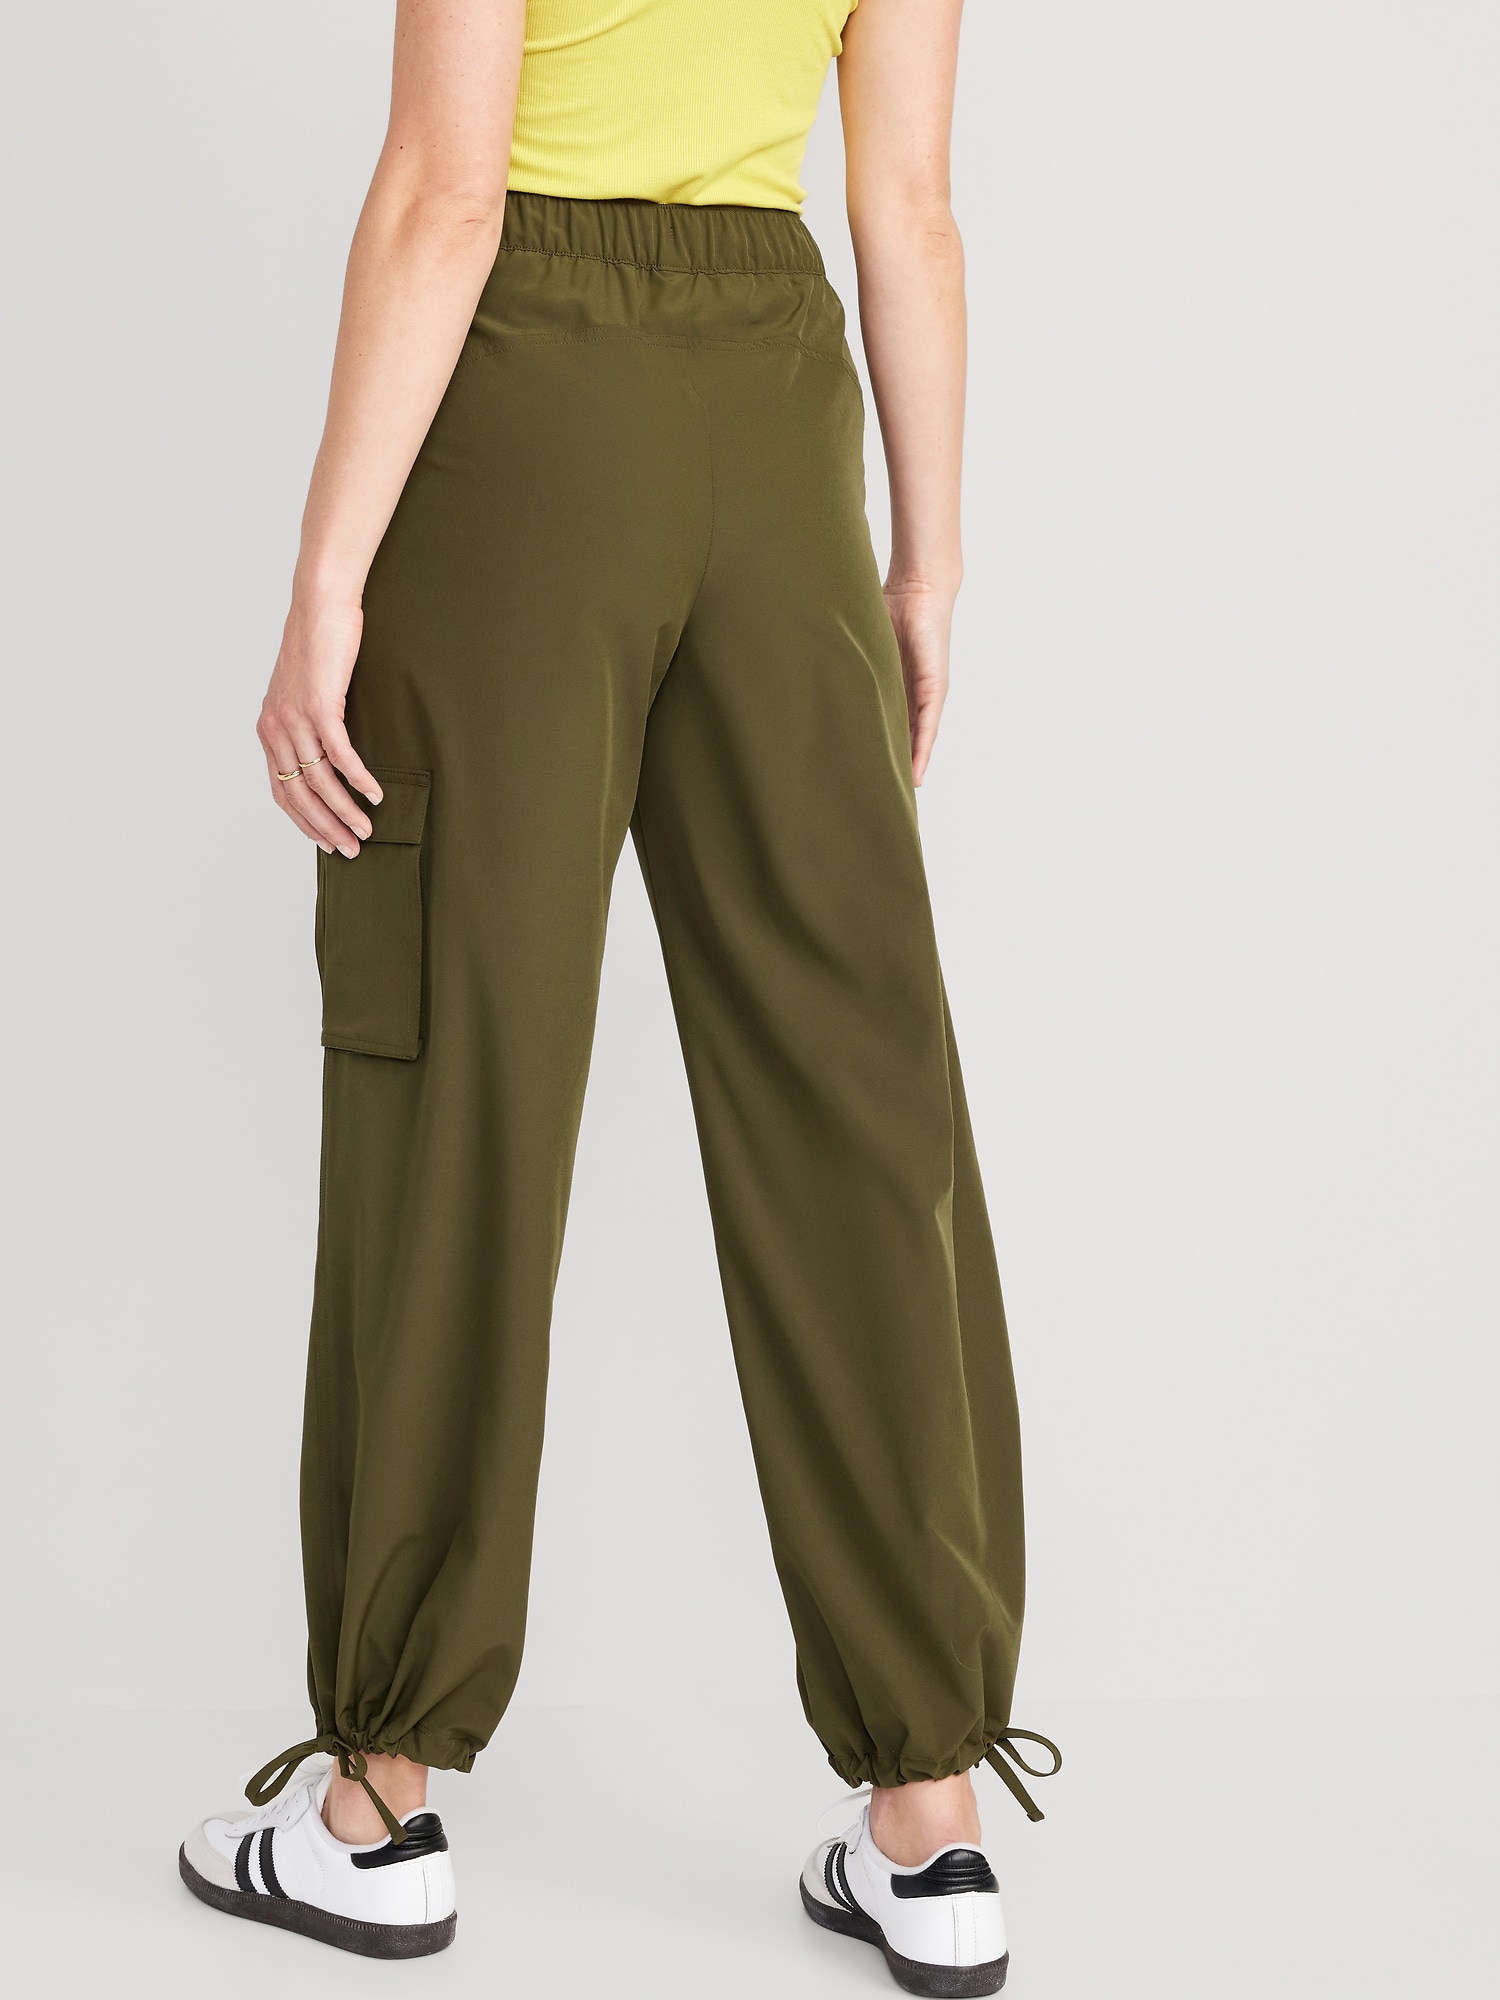 High-Waisted StretchTech Wide-Leg Cargo Pants For Women Old, 51% OFF